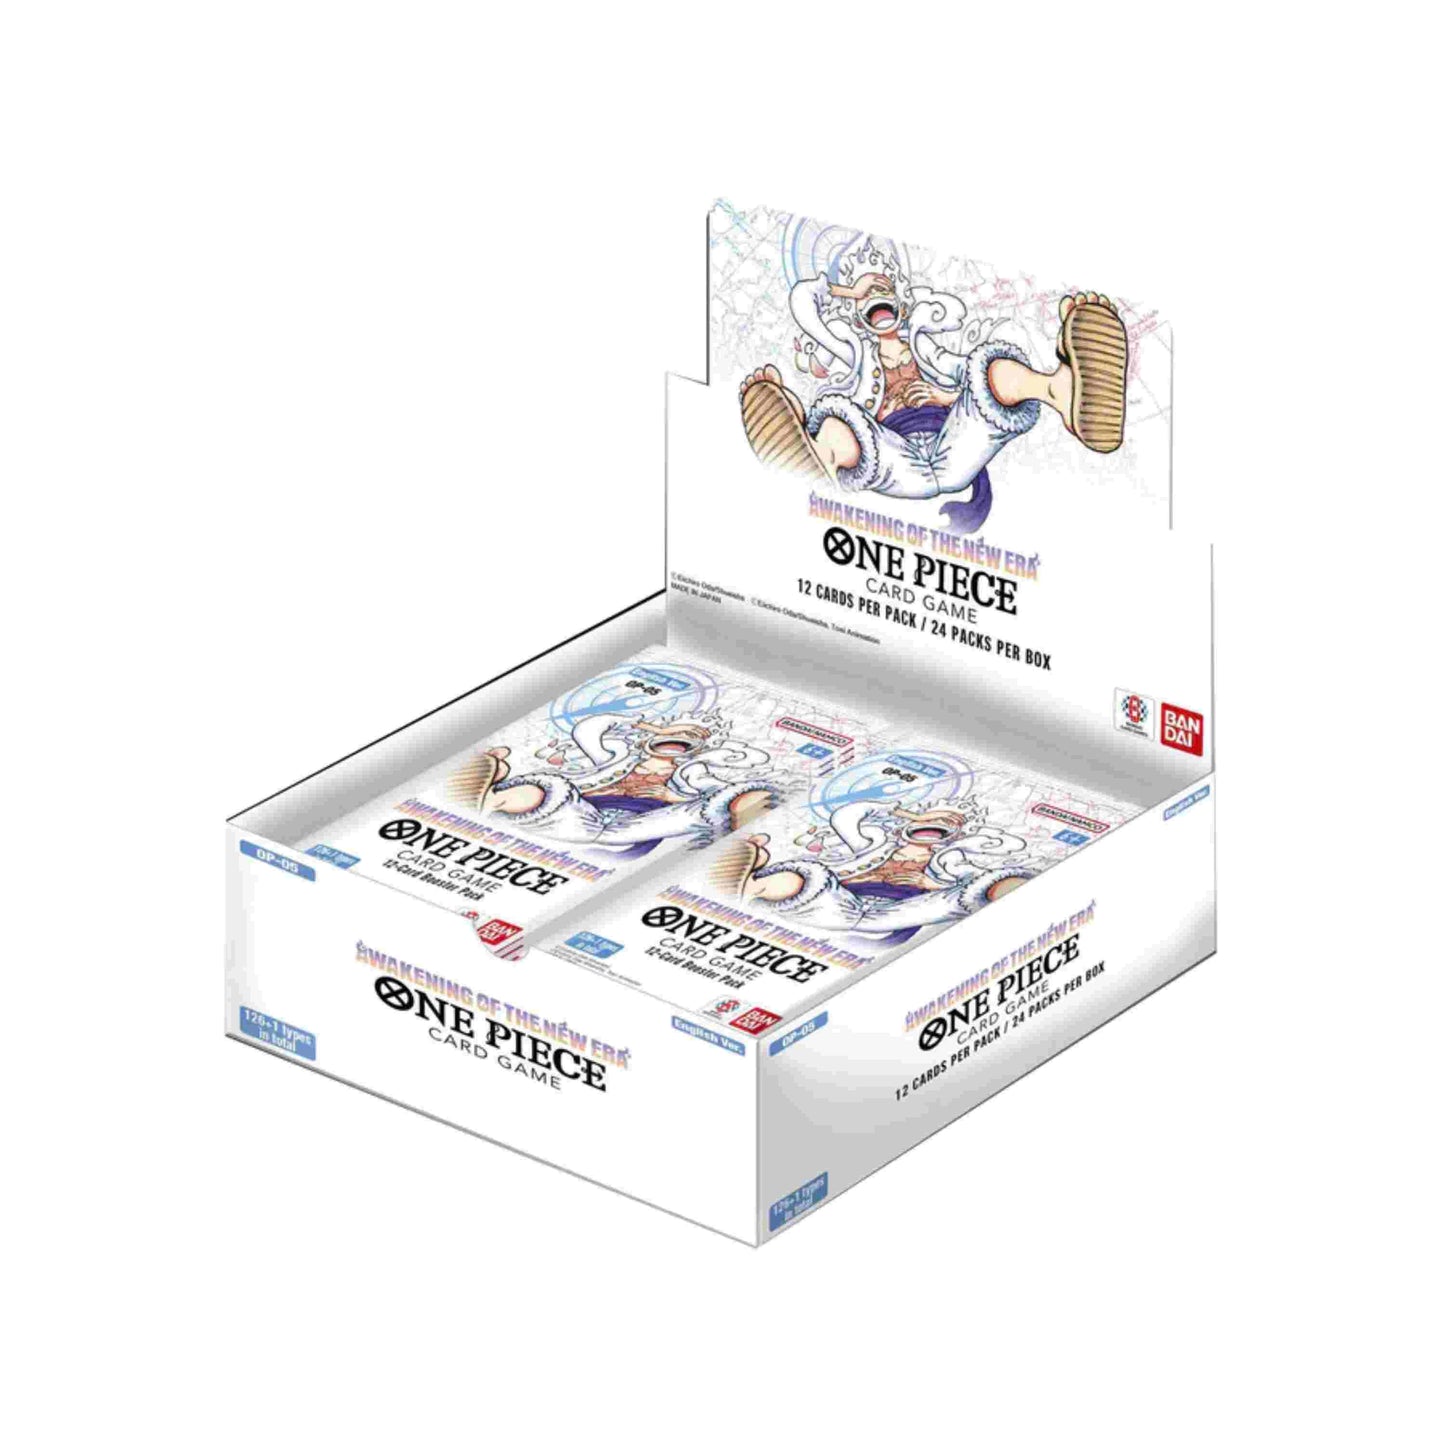 One Piece Card Game Awakening of the New Era OP-05 Booster Box